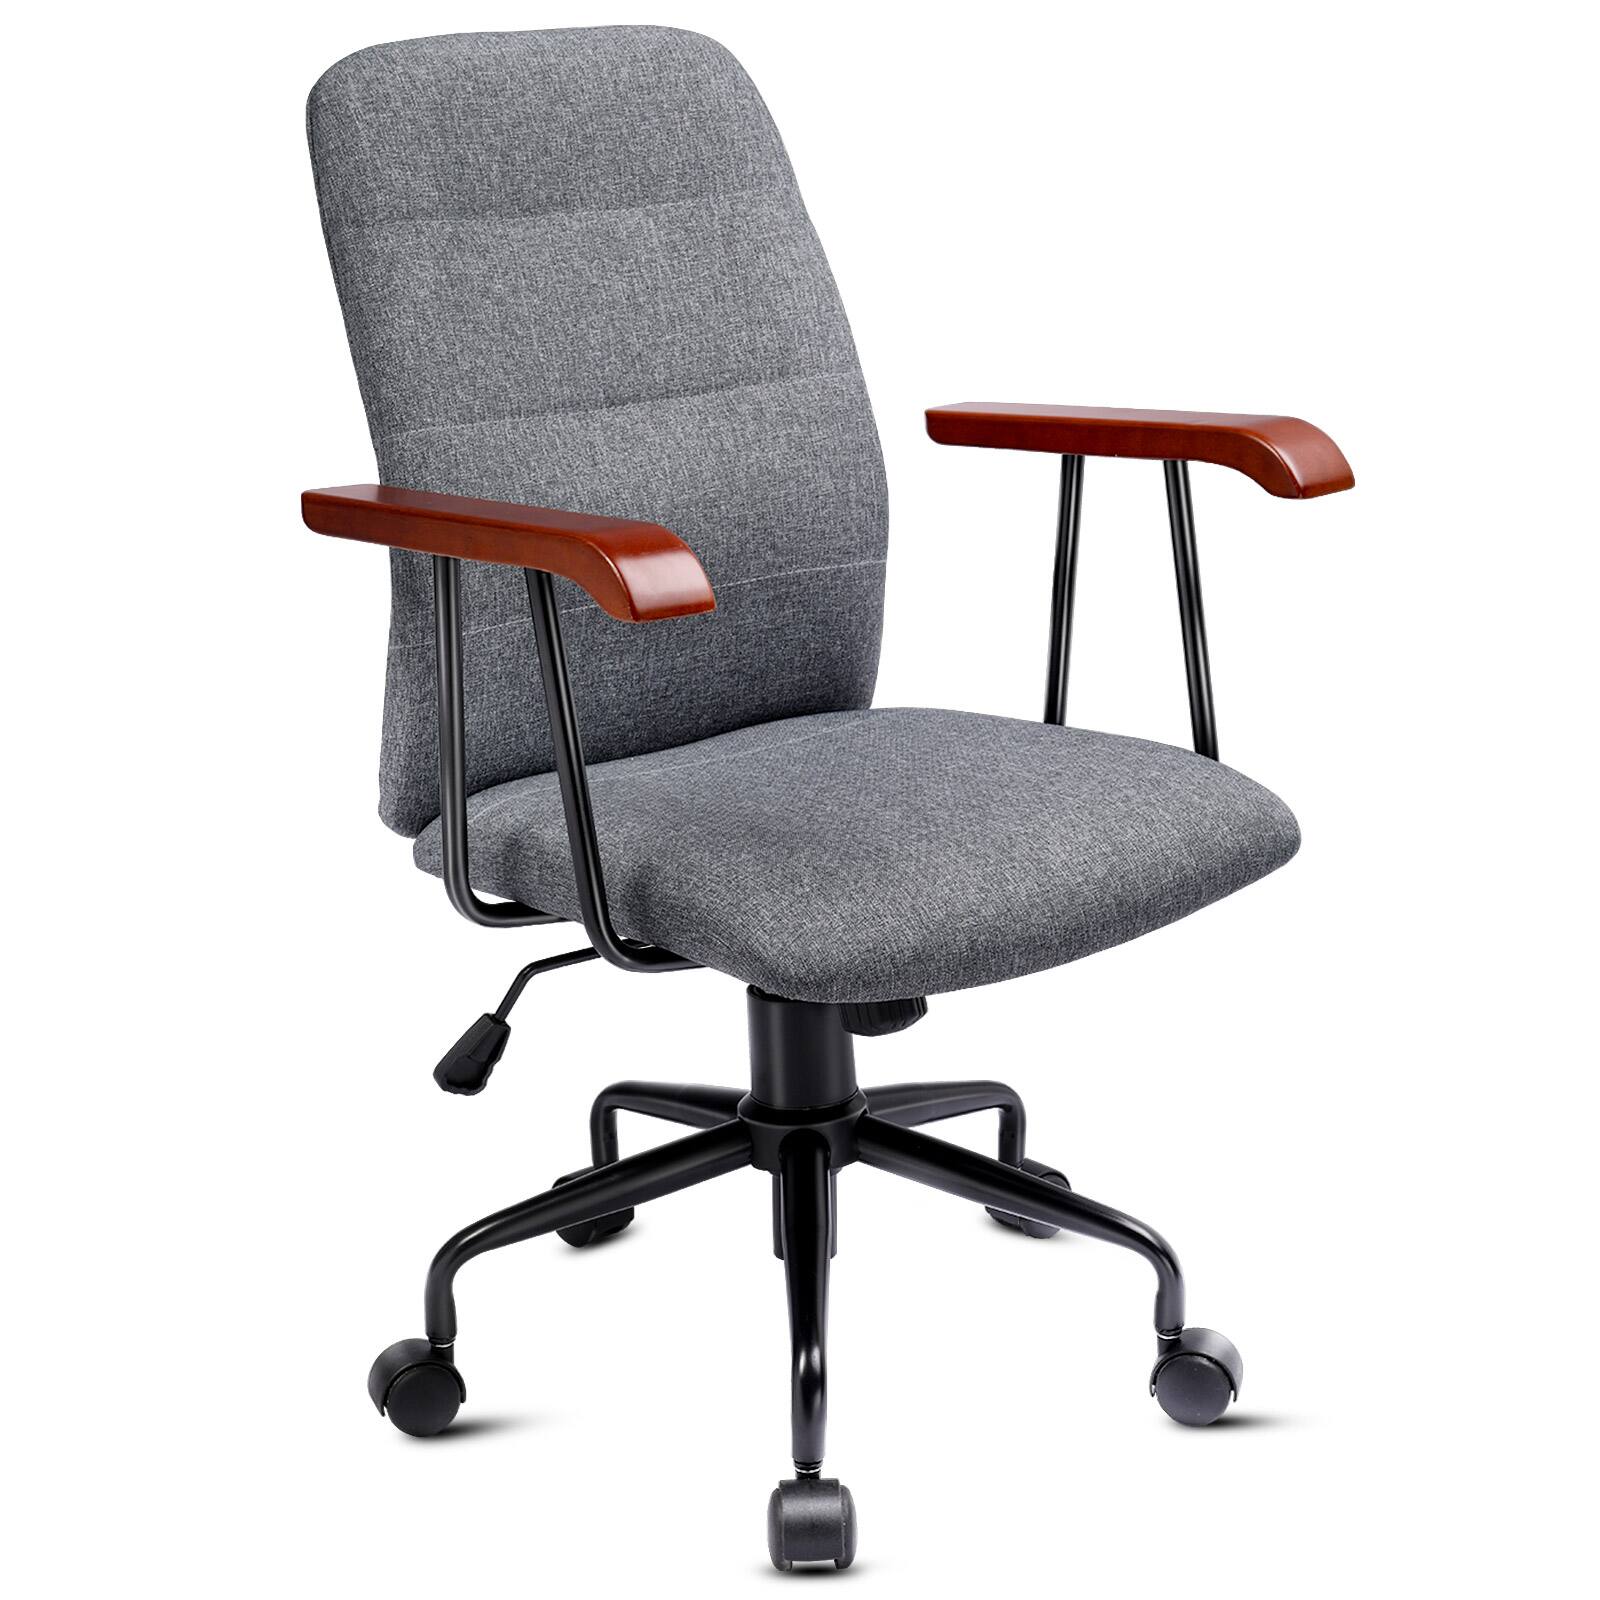 ComHoma Office Computer Chair: Ergonomic, Adjustable, Swivel, Modern Style Chair (Beige, MID) for $50.24 + FS